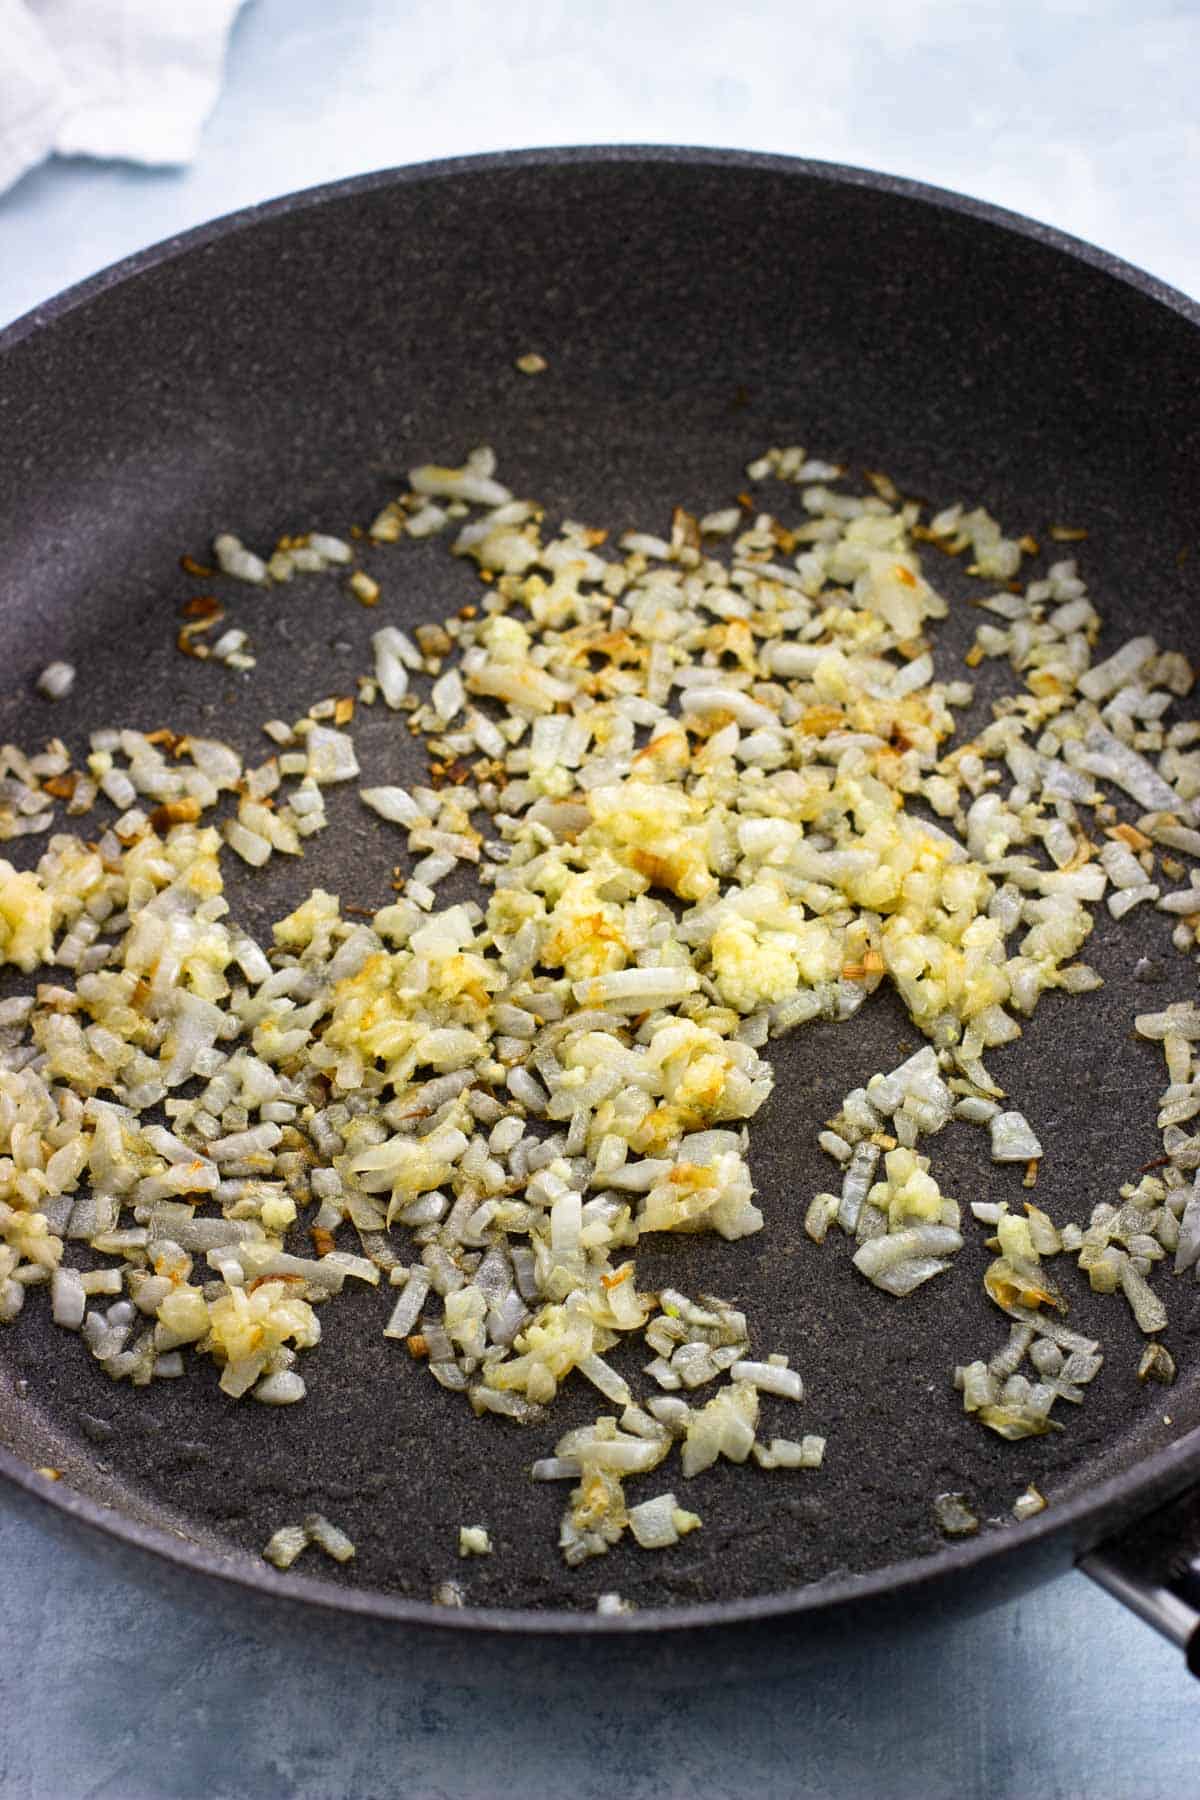 Sauteed onion and garlic in a pan.